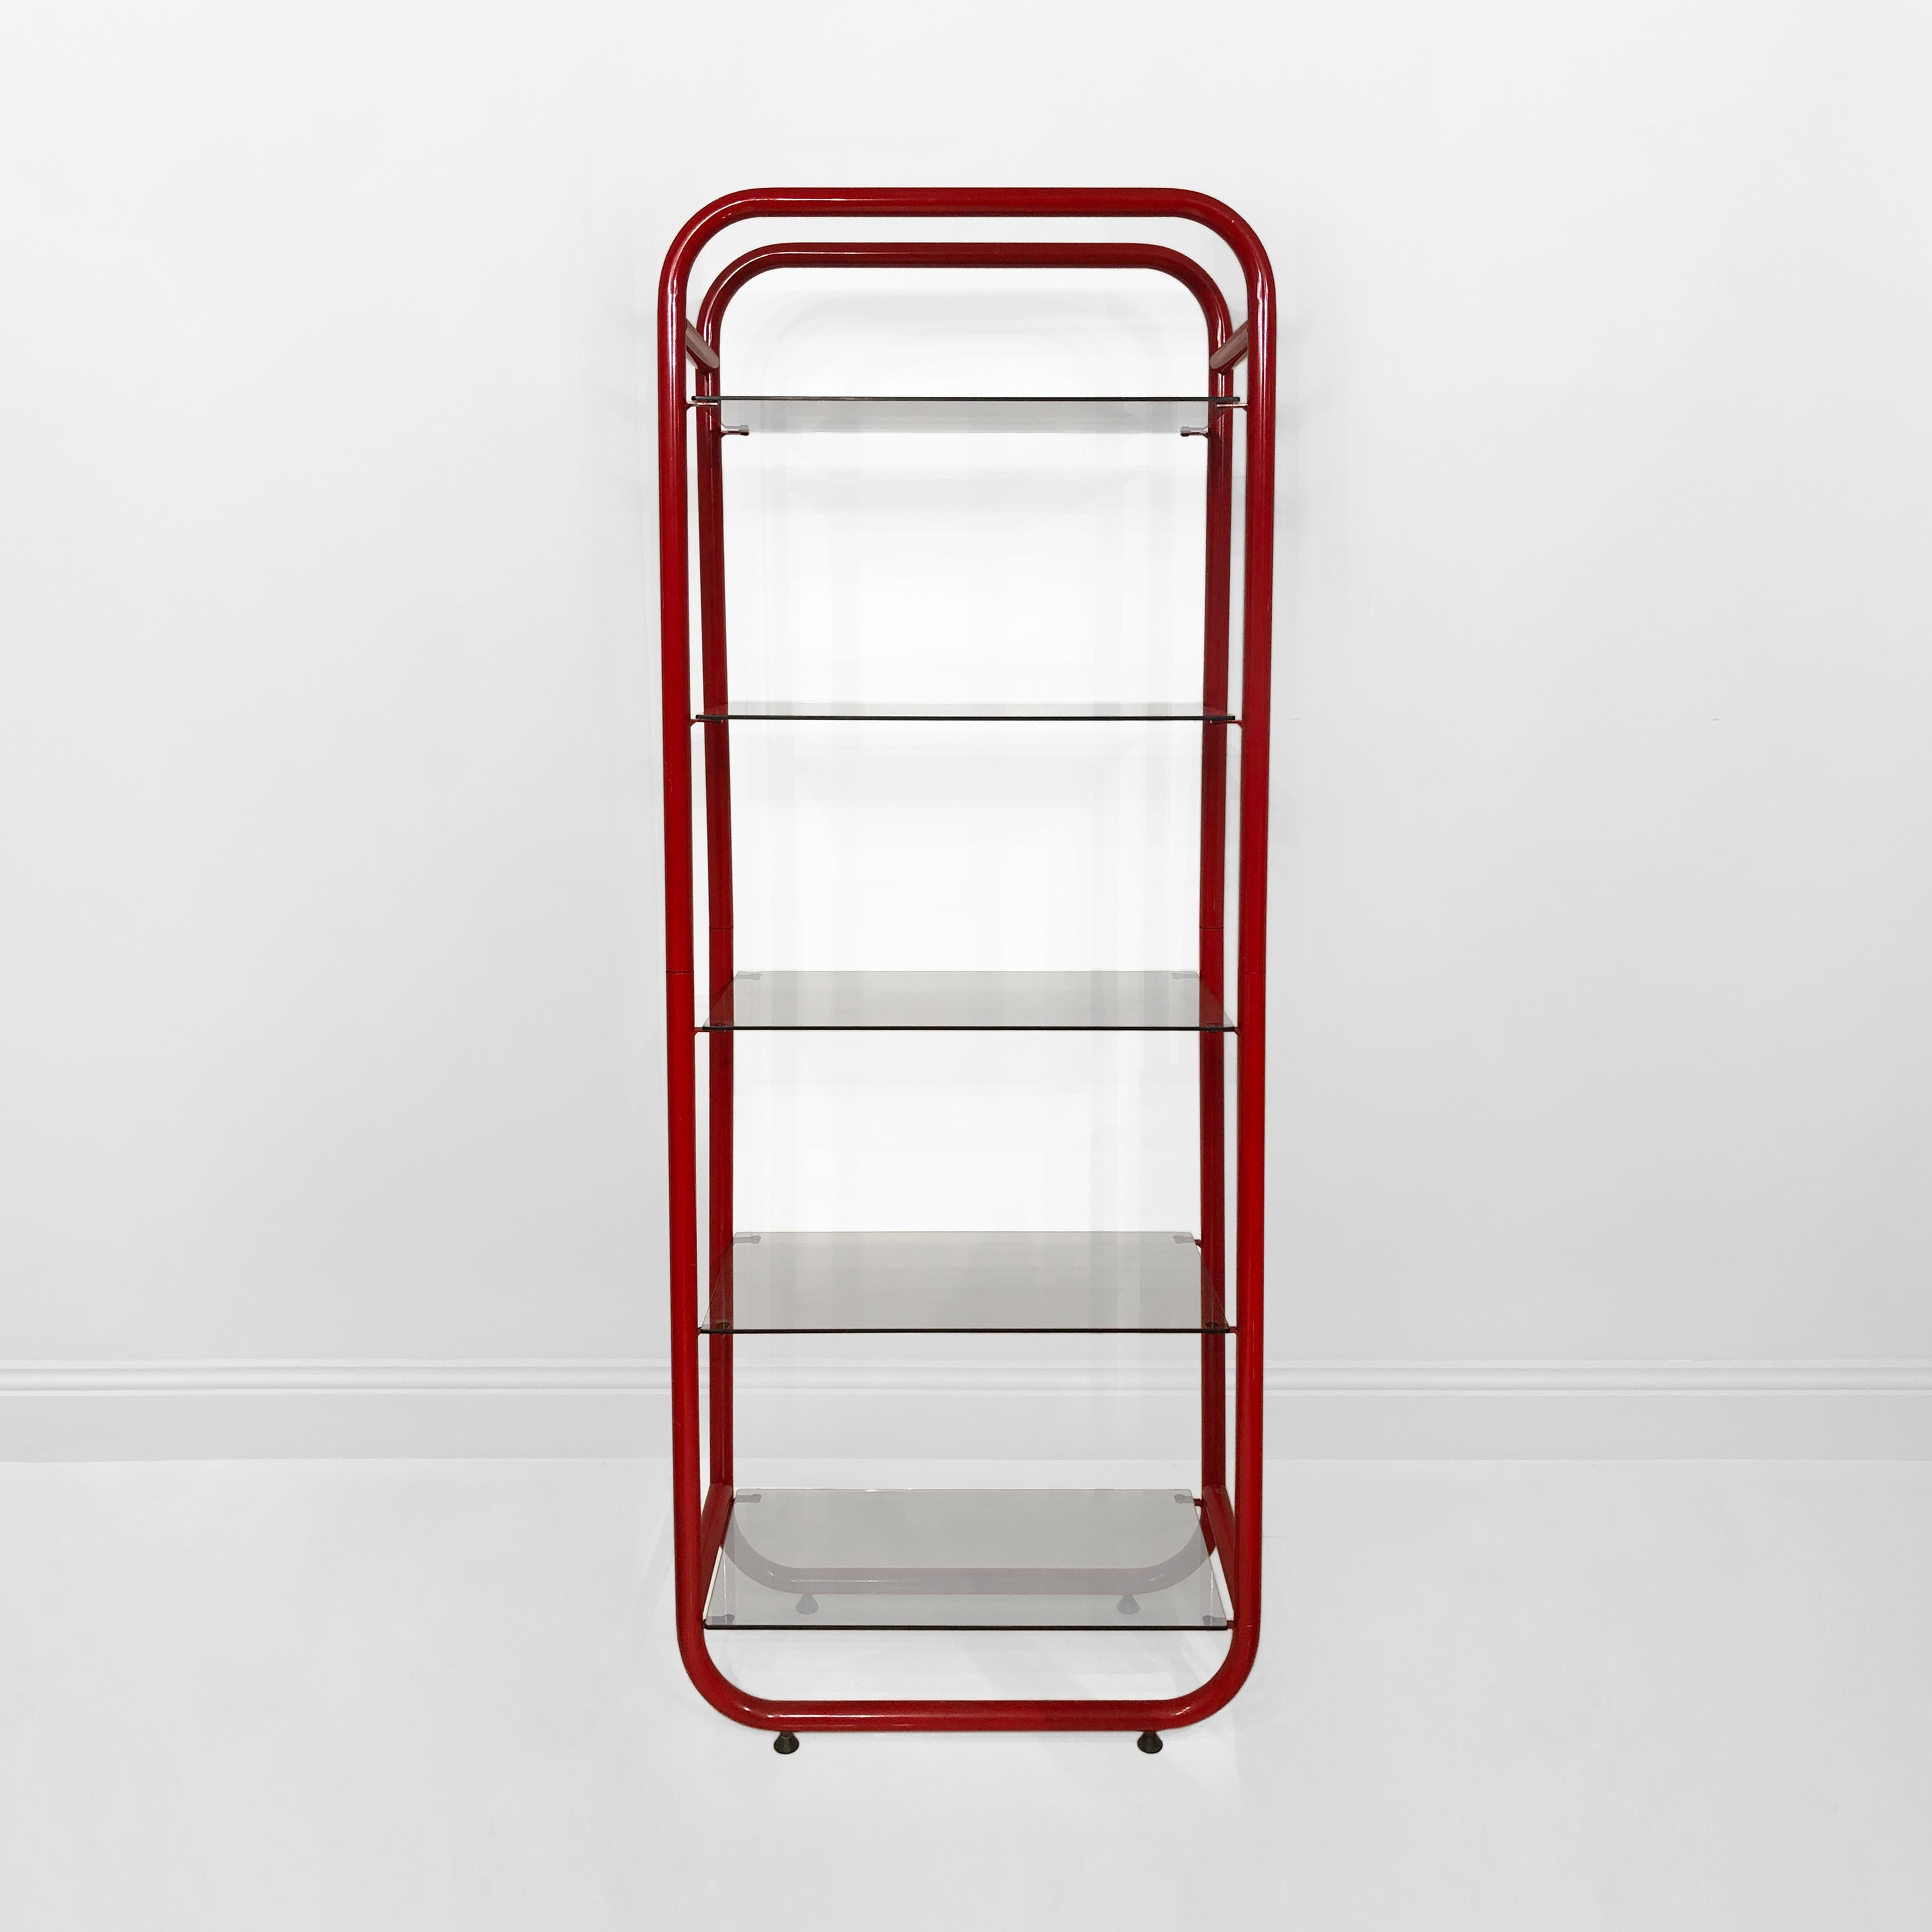 Red Italian etagere, very much in the manner of the Memphis Milano group, and originating from the 1980s. A tubular, powder-coated metal frame in a pleasing vermillion houses five clear glass shelves. One of the shelves has a small chip.

This fun